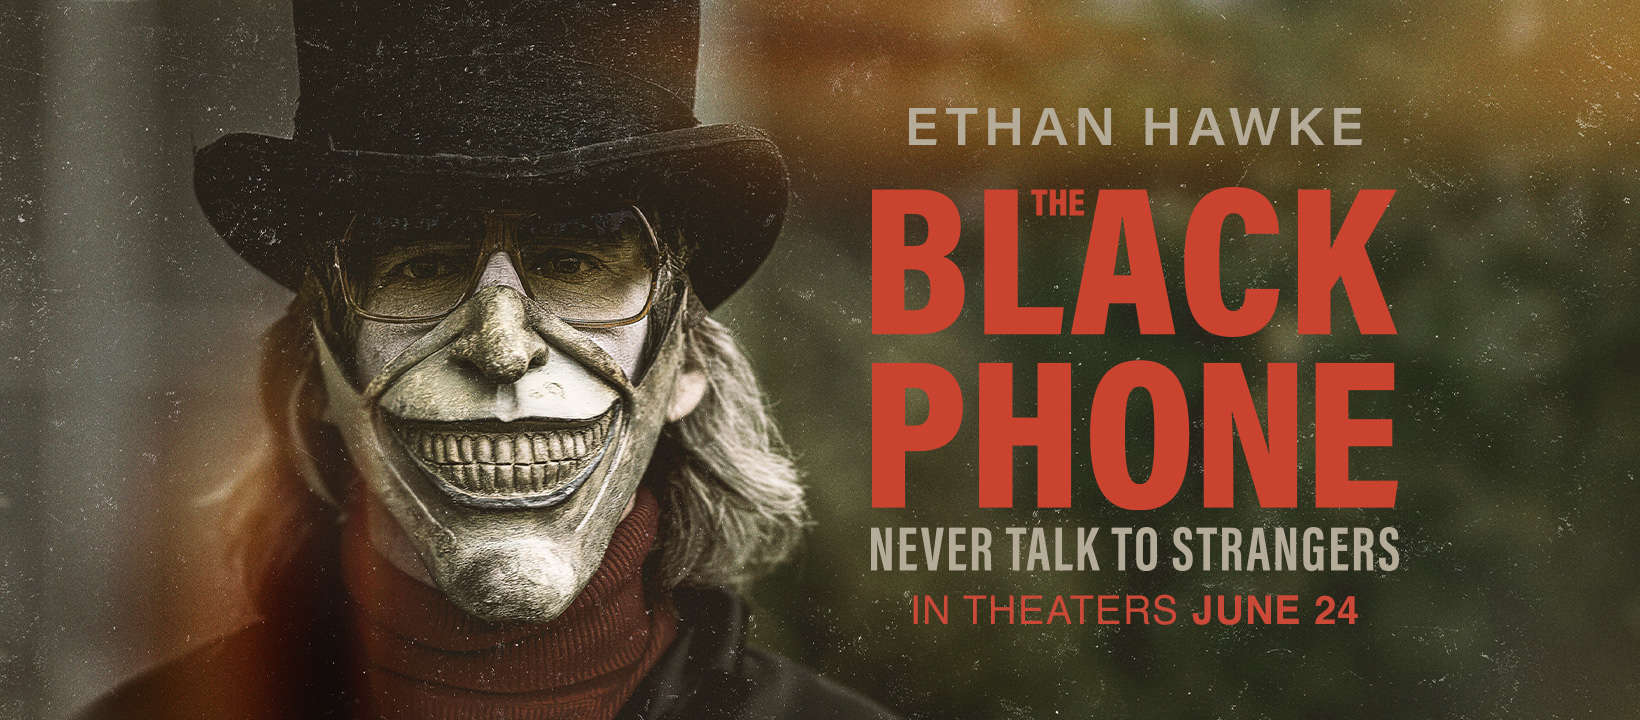 REVIEW: The Black Phone - Poor Reception